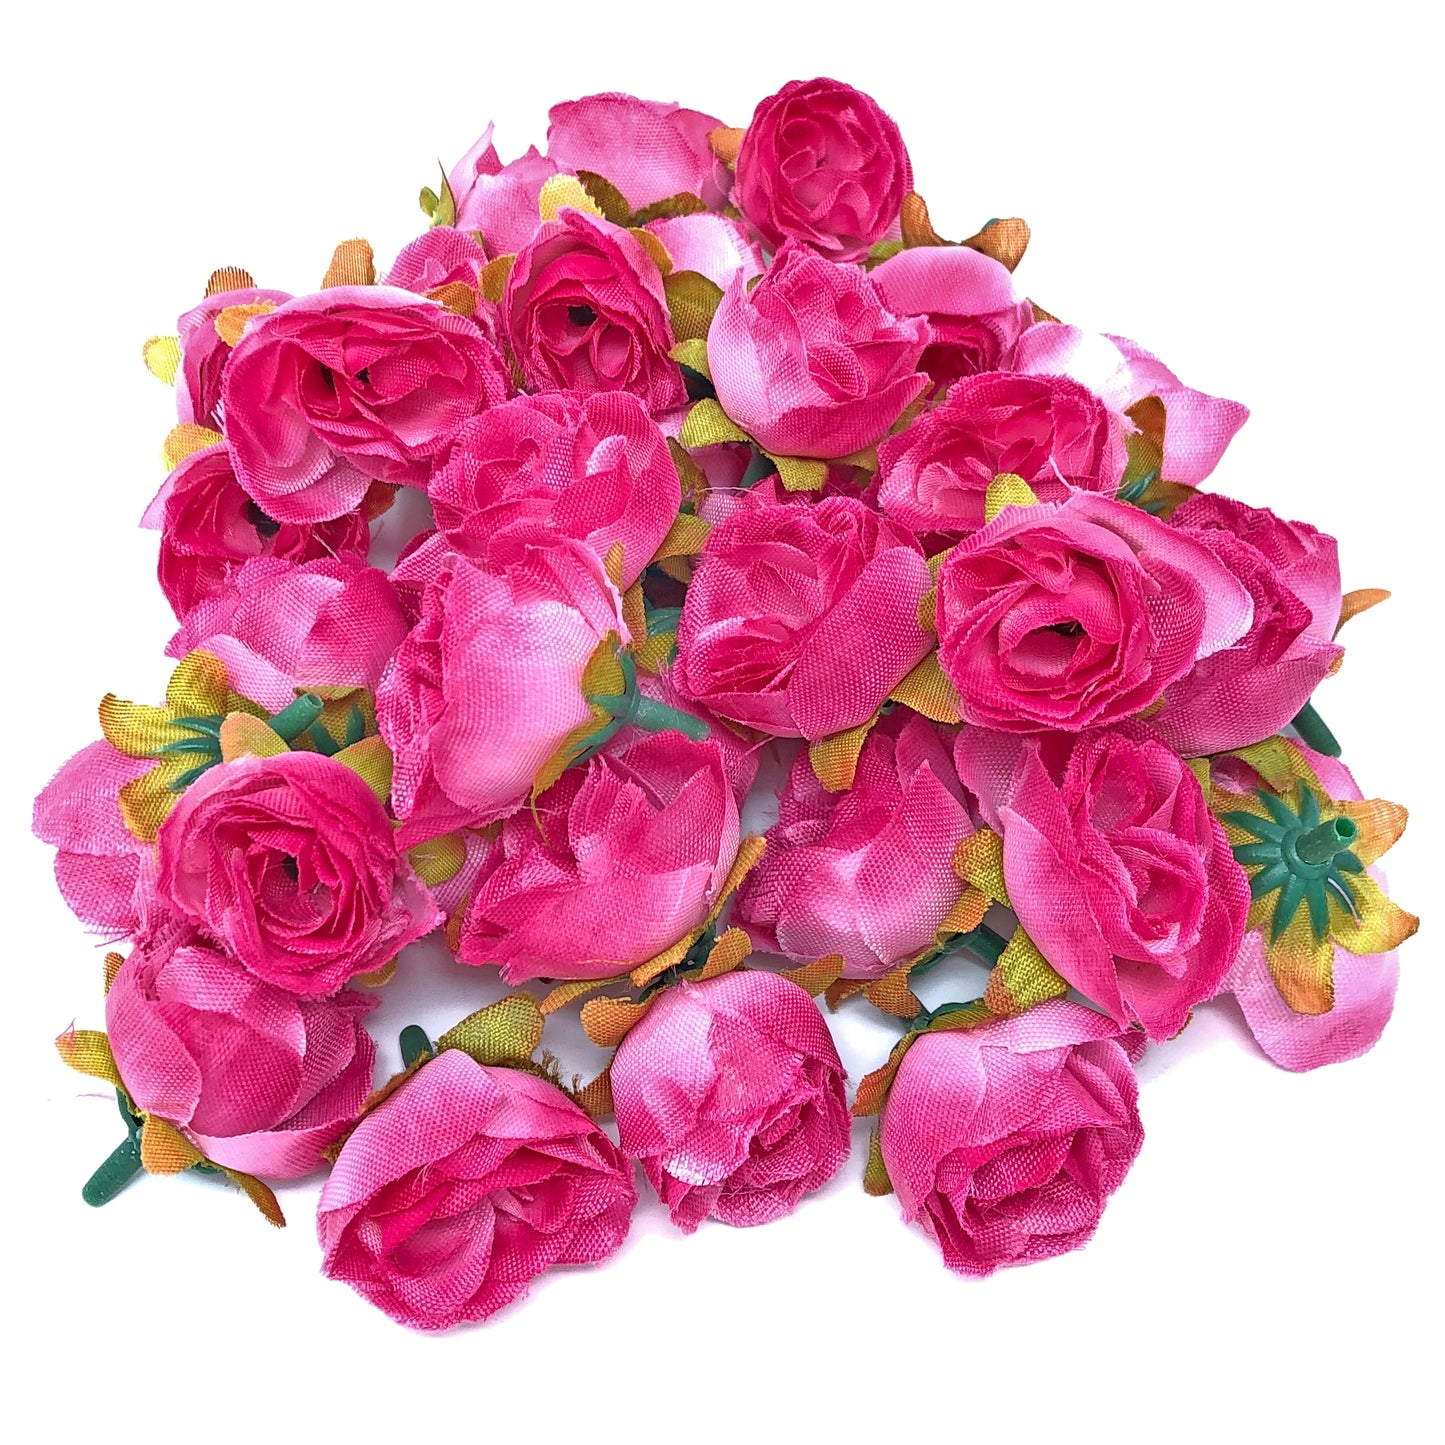 25mm Synthetic Rose Bud Flowers (Faux Silk) - Mini Rose Buds